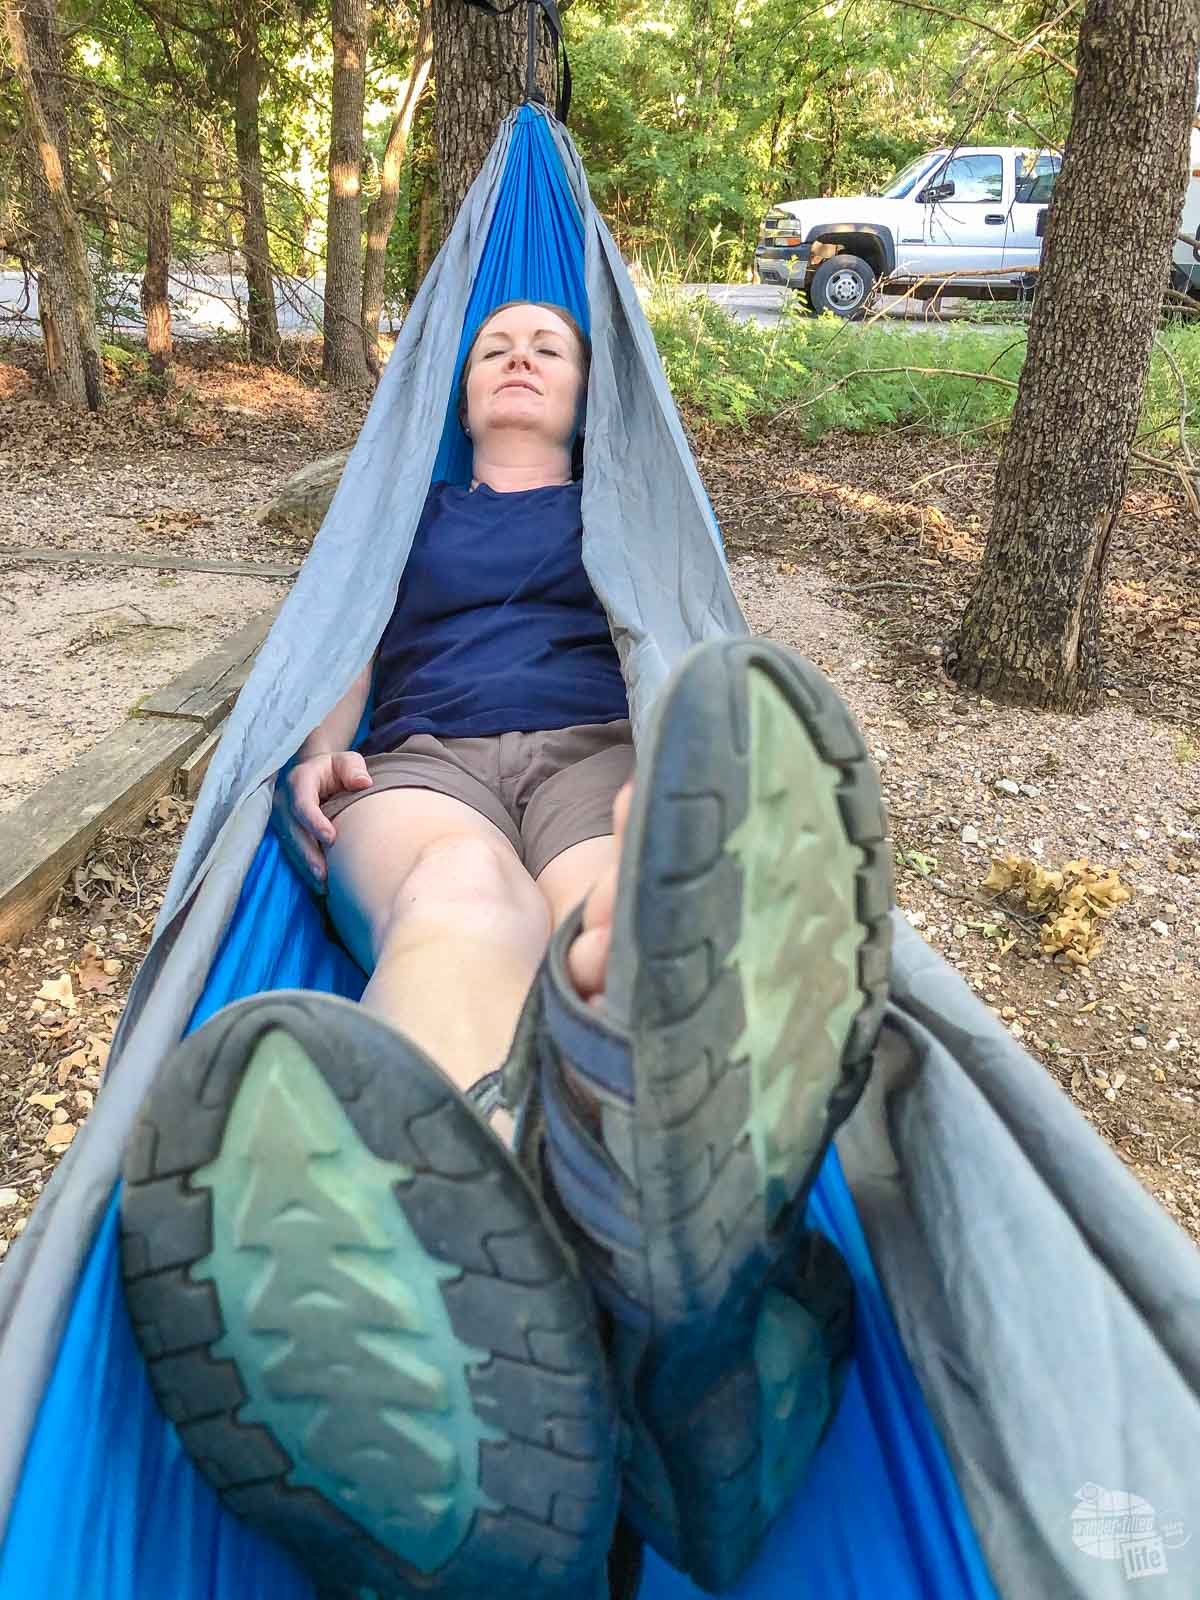 Bonnie relaxing in the hammock at Chickasaw National Recreation Area.